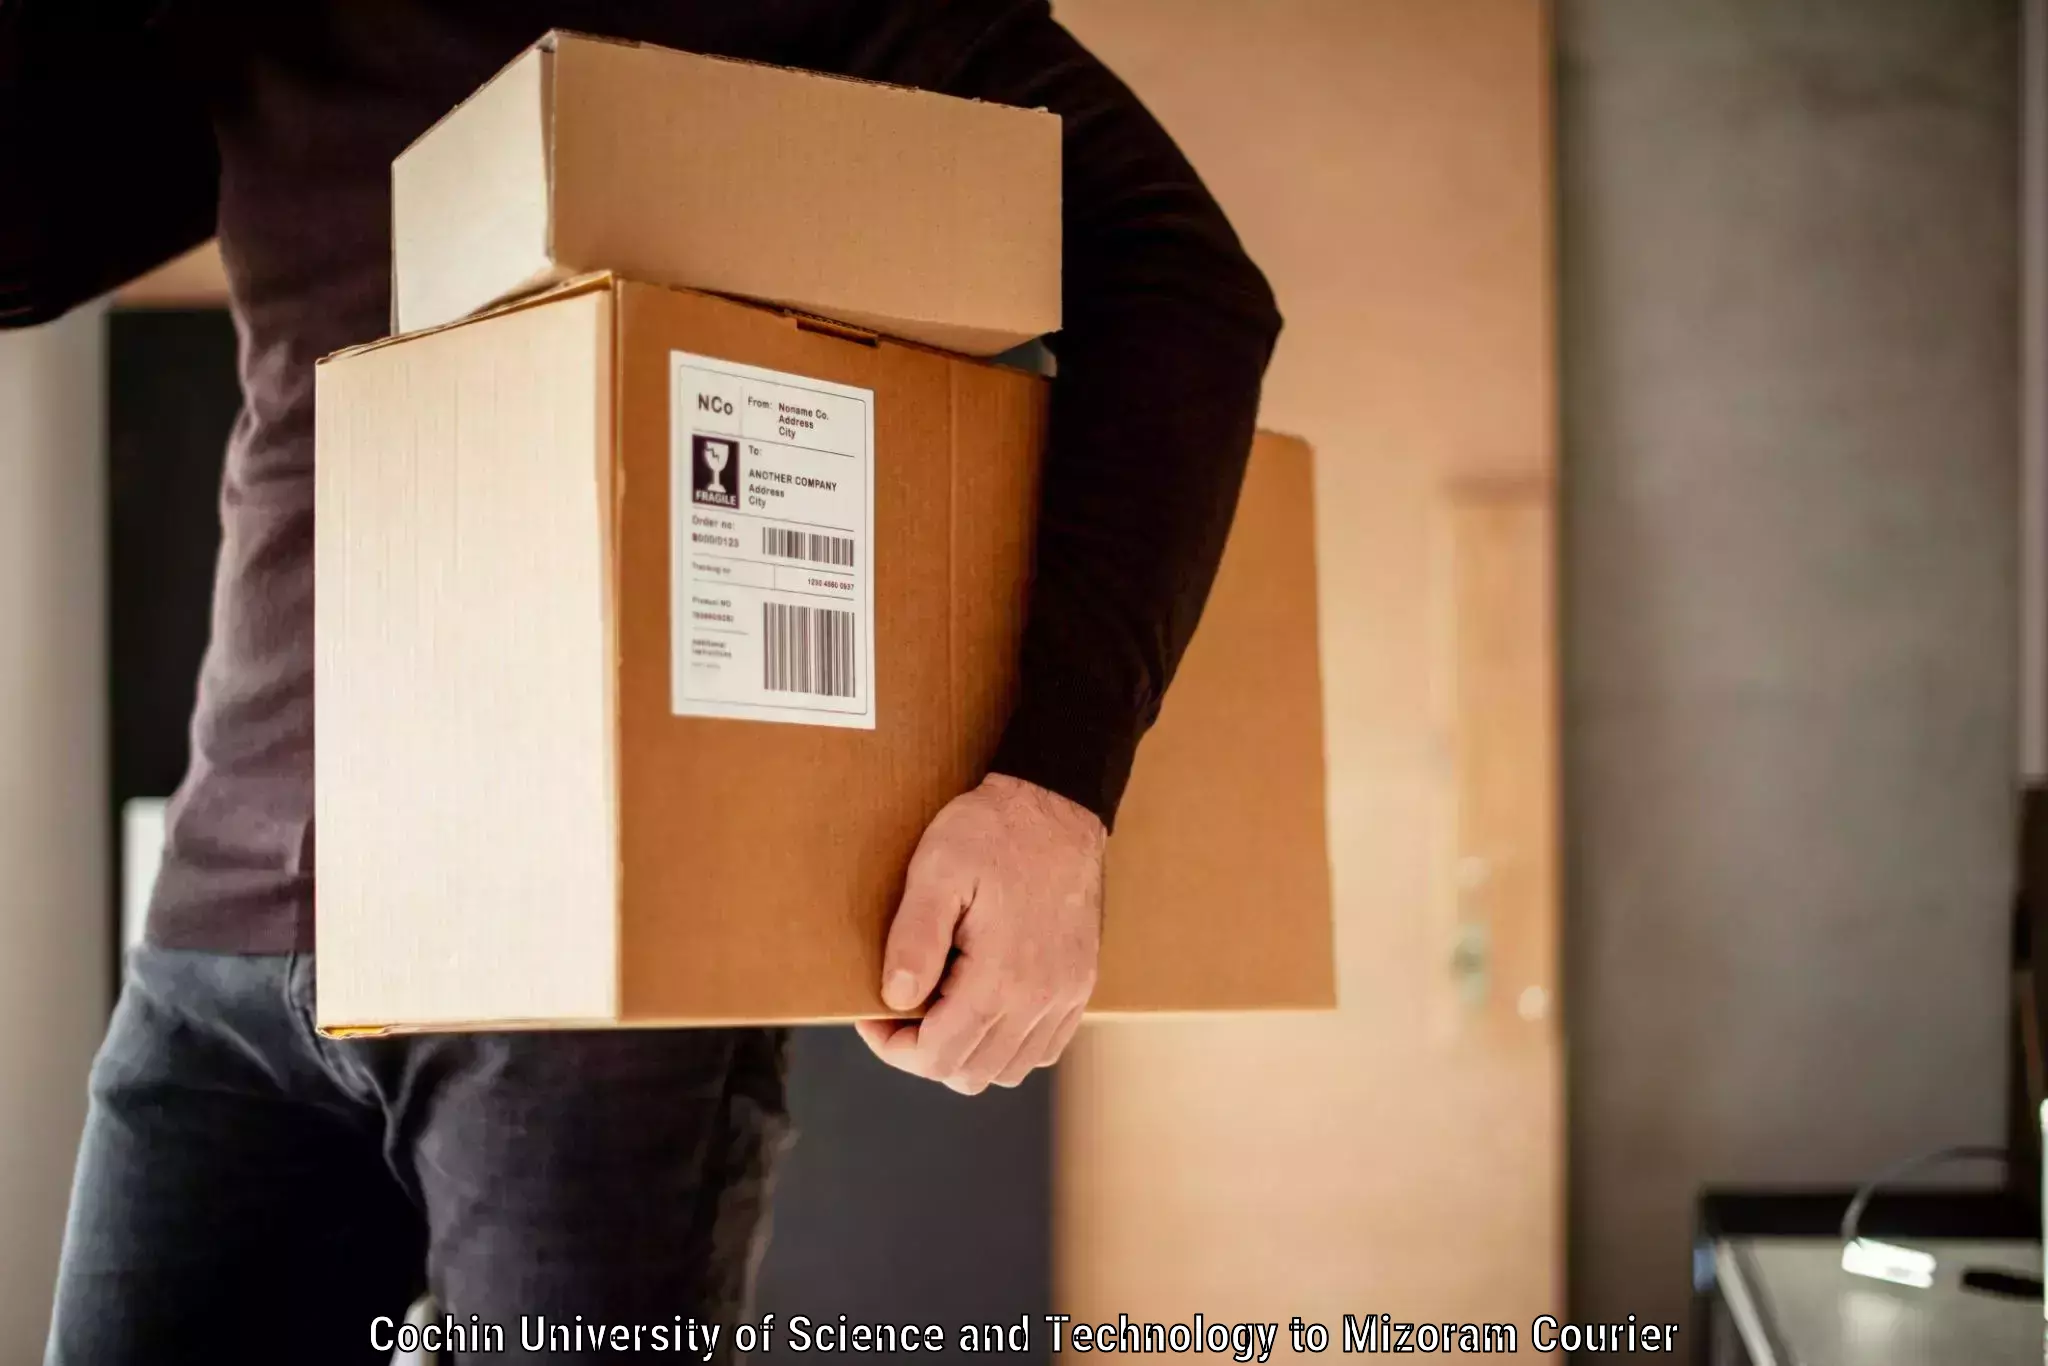 Scheduled baggage courier Cochin University of Science and Technology to Mizoram